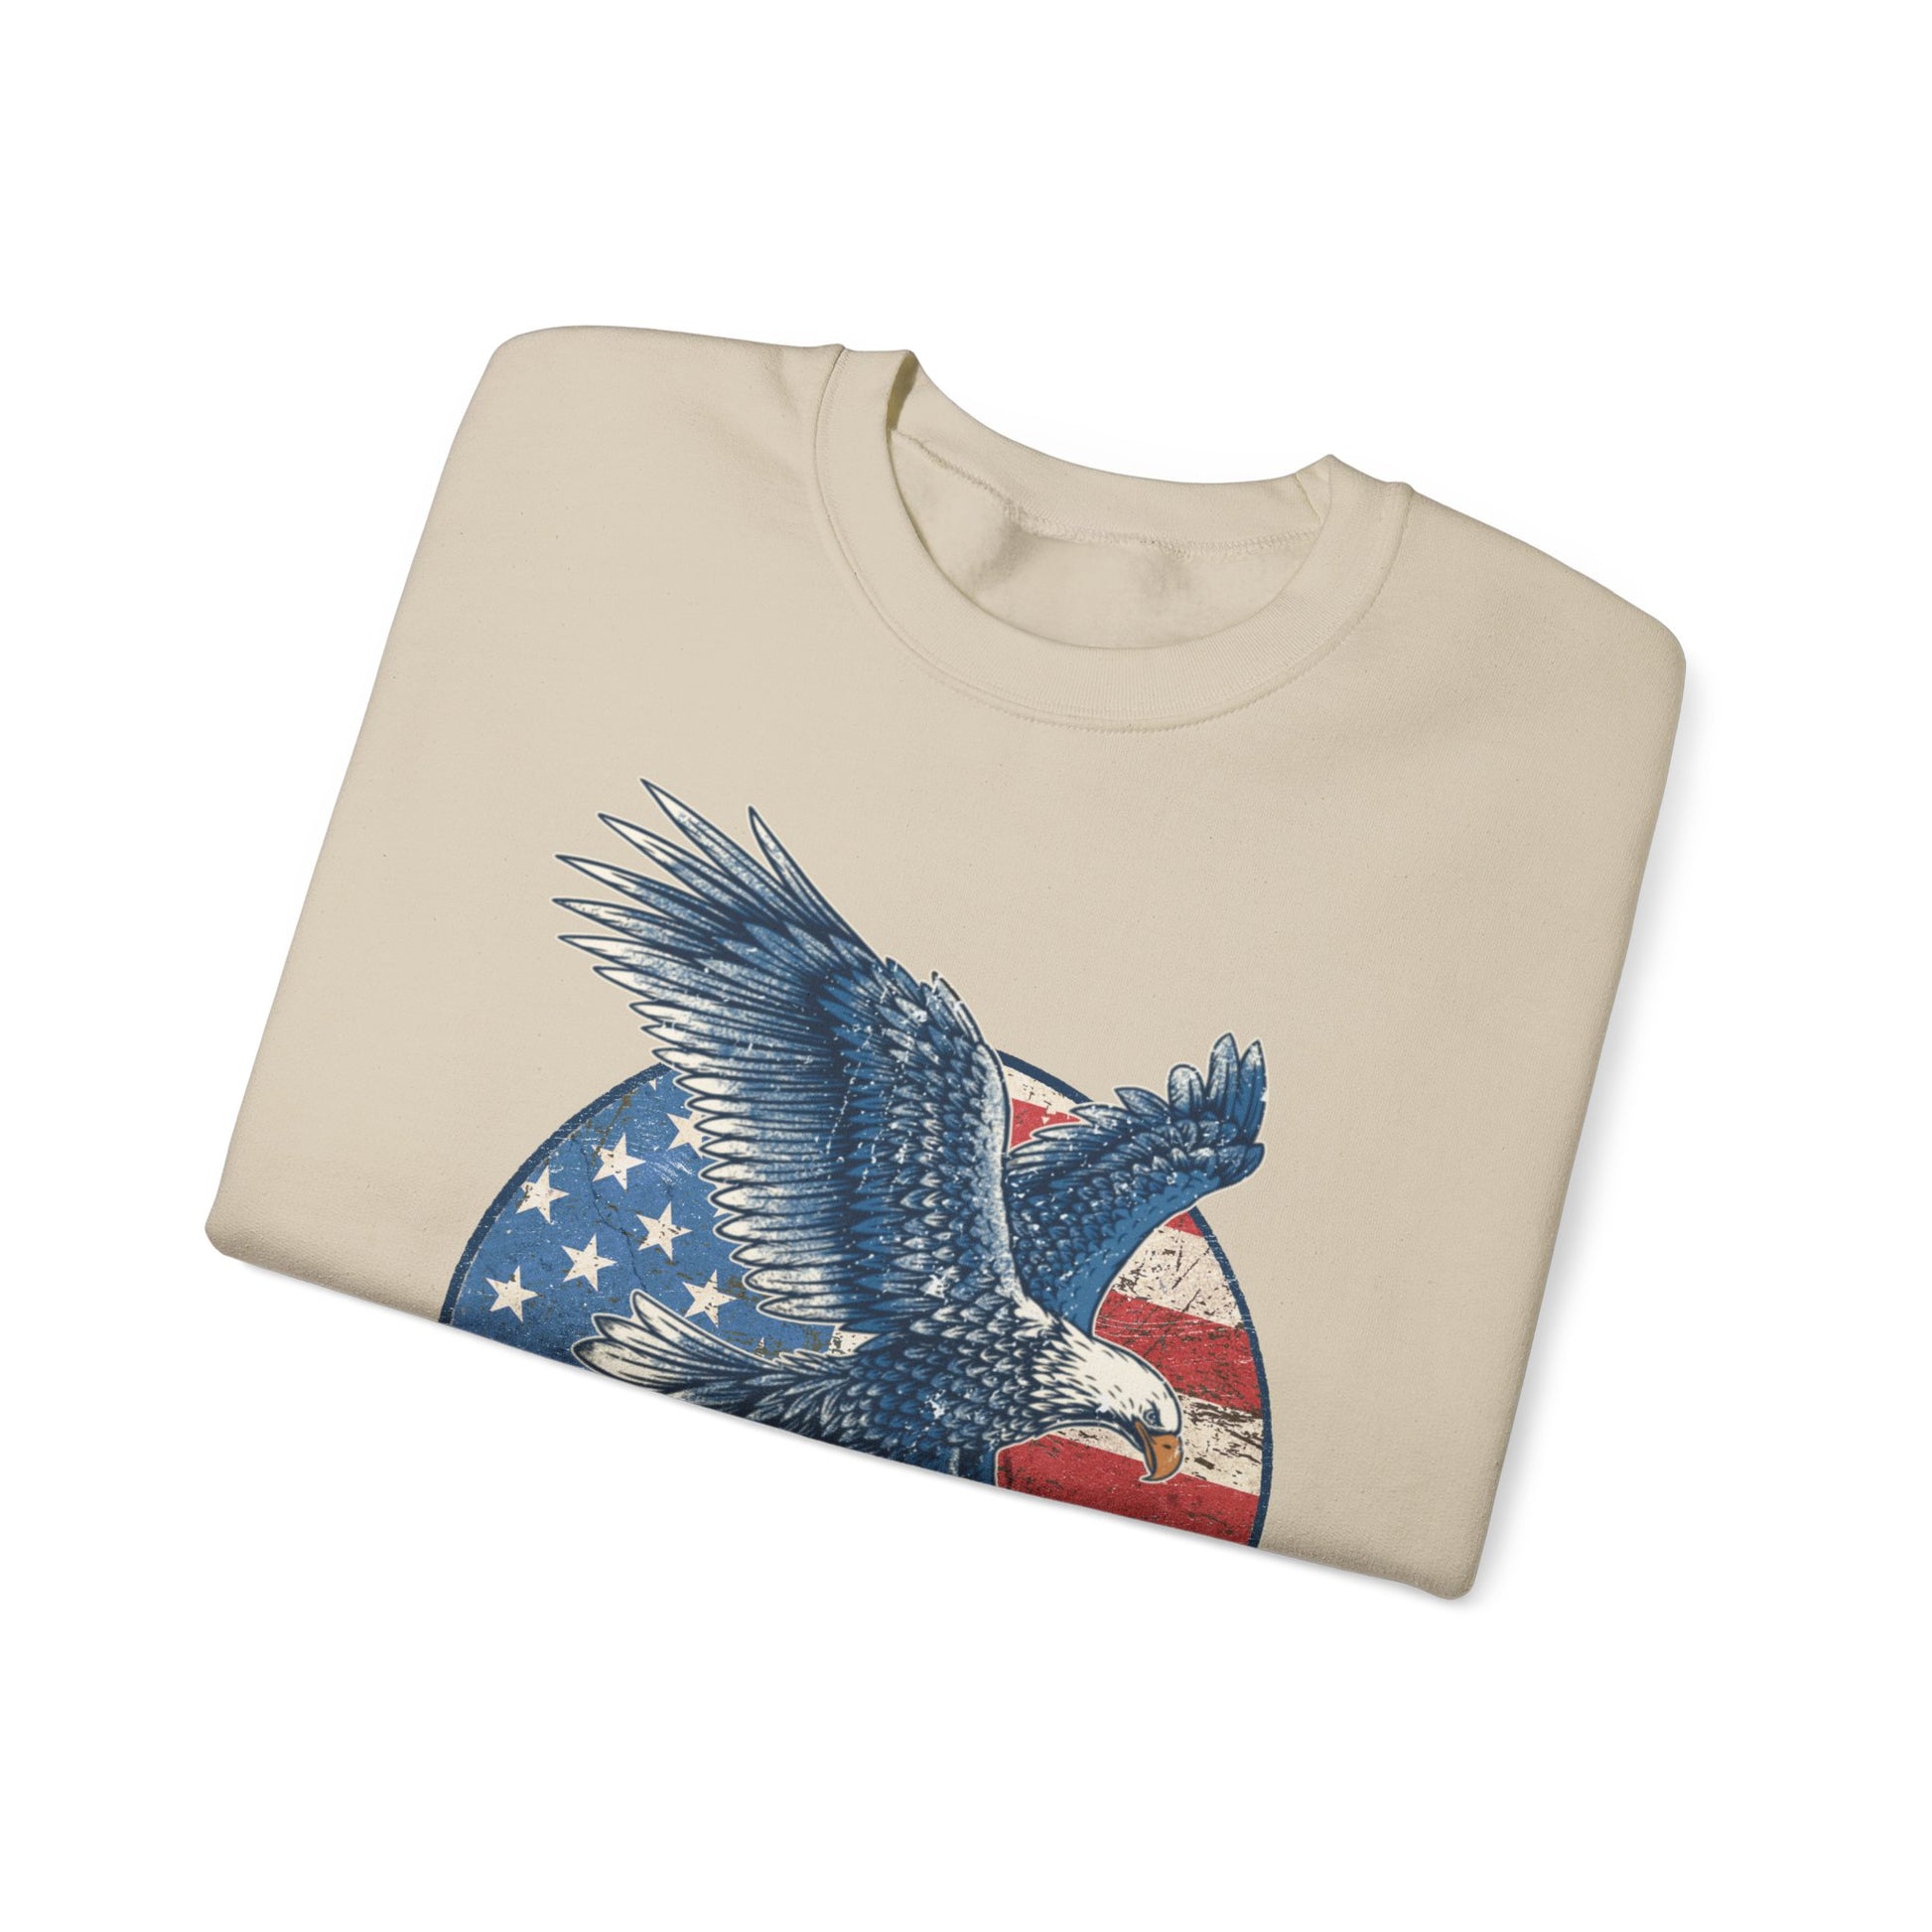 Retro 4th of July 2024 Distressed American Flag Eagle 1776 Made in America Vintage Patriotic America Freedom Fourth of July Independence Day Sweatshirt - Stay Tomorrow Needs You Retro 4th of July 2024 Distressed American Flag Eagle 1776 Made in America Vintage Patriotic America Freedom Fourth of July Independence Day Sweatshirt